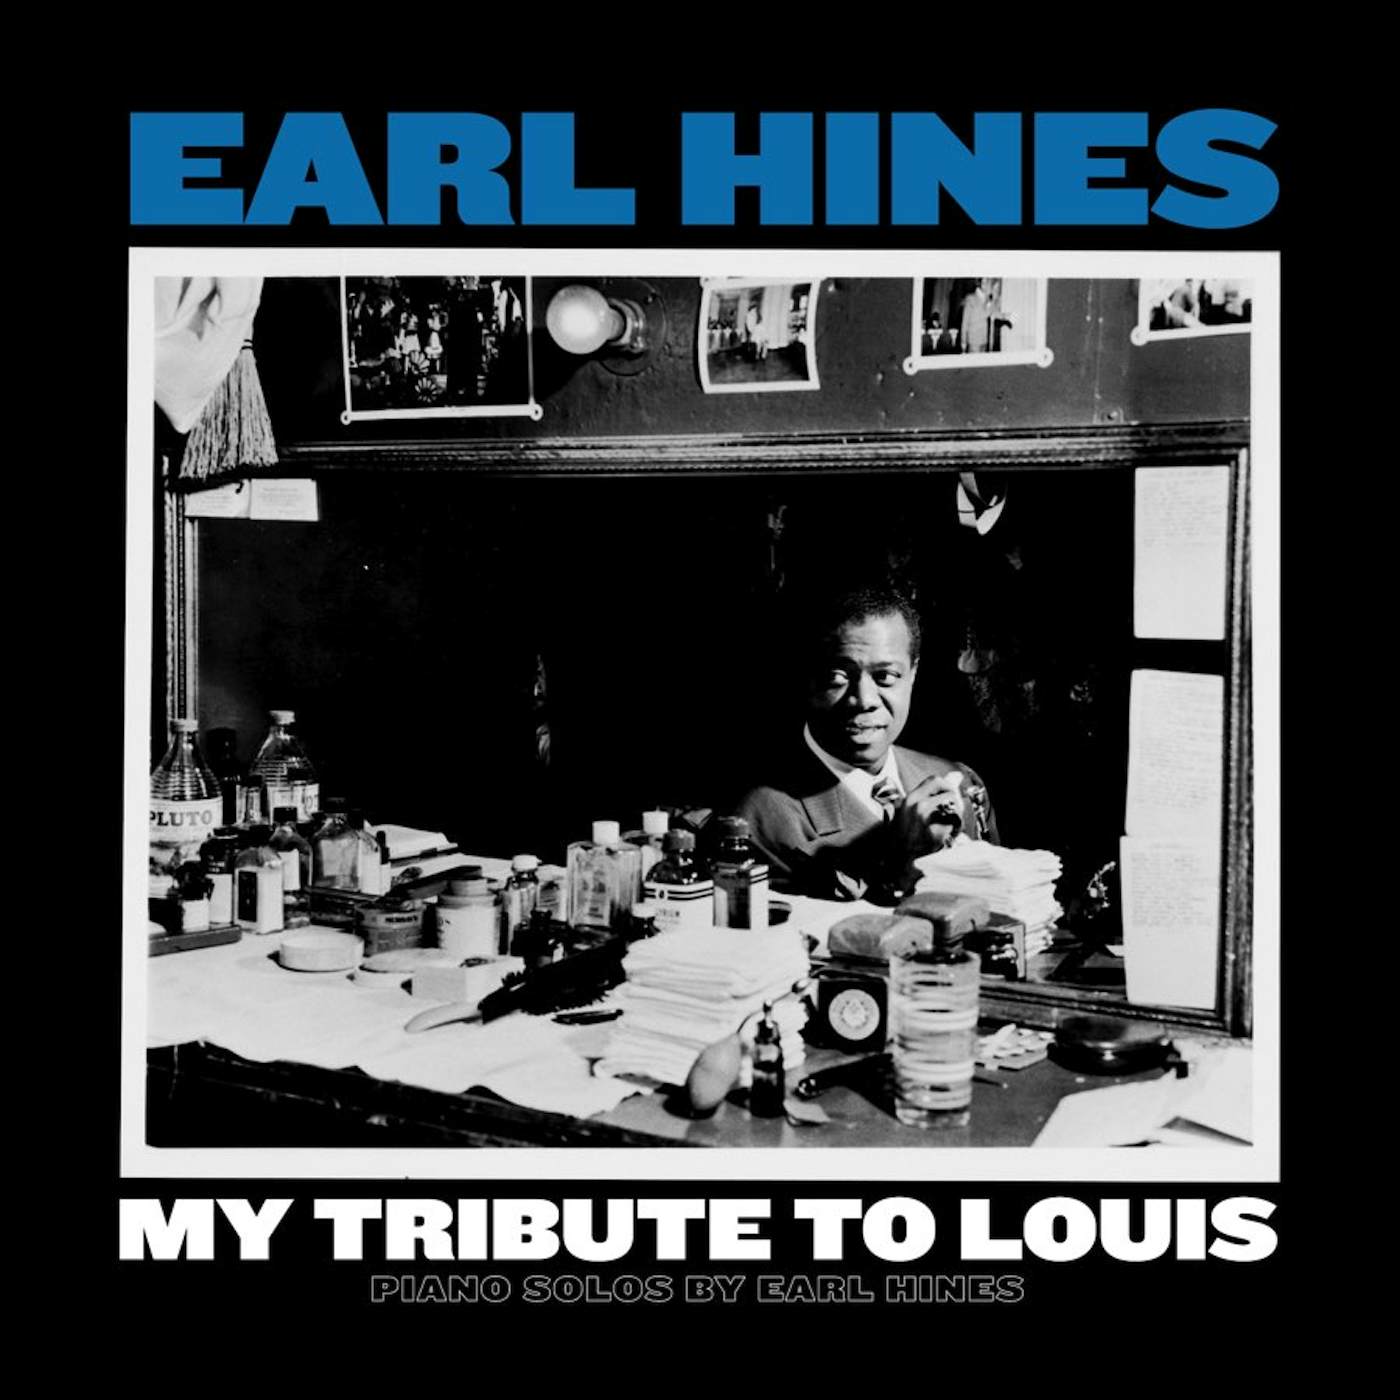 MY TRIBUTE TO LOUIS: PIANO SOLOS BY EARL HINES Vinyl Record